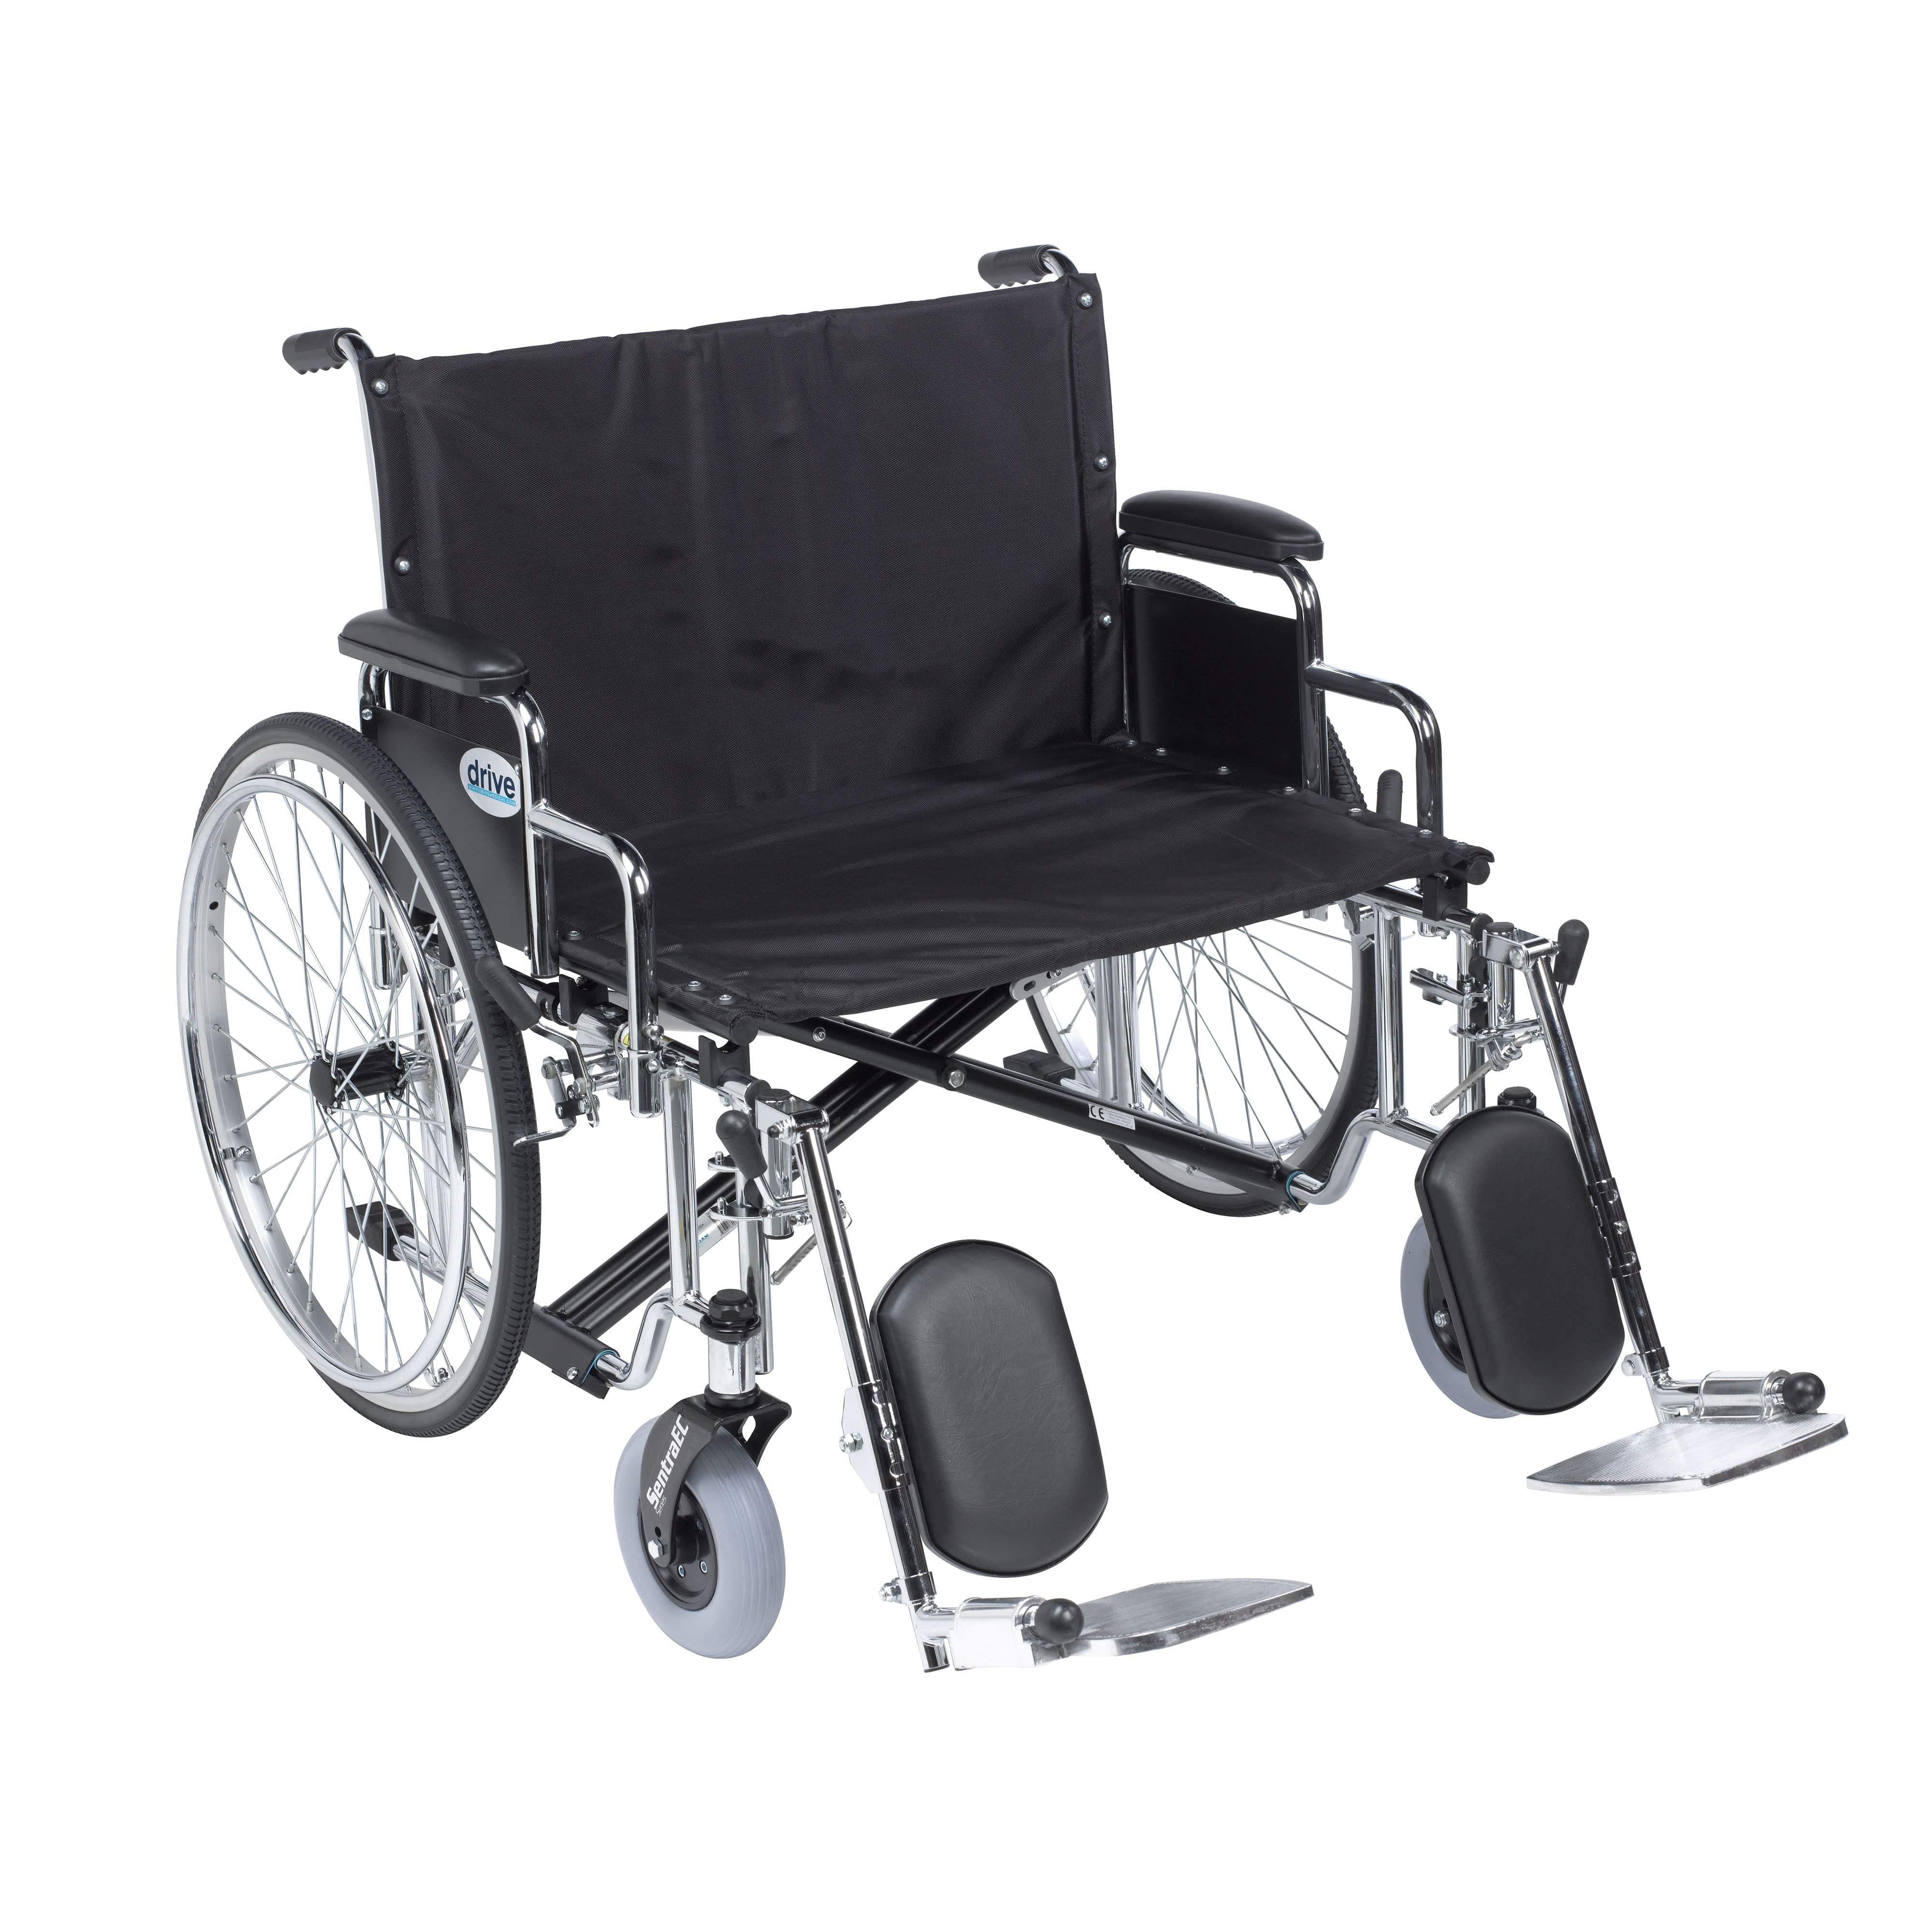 Drive Medical Wheelchairs/Heavy Duty Wheelchairs Detachable Desk Arms and Elevating Leg Rests / 28" Seat Drive Medical Sentra EC Heavy Duty Extra Wide Wheelchair